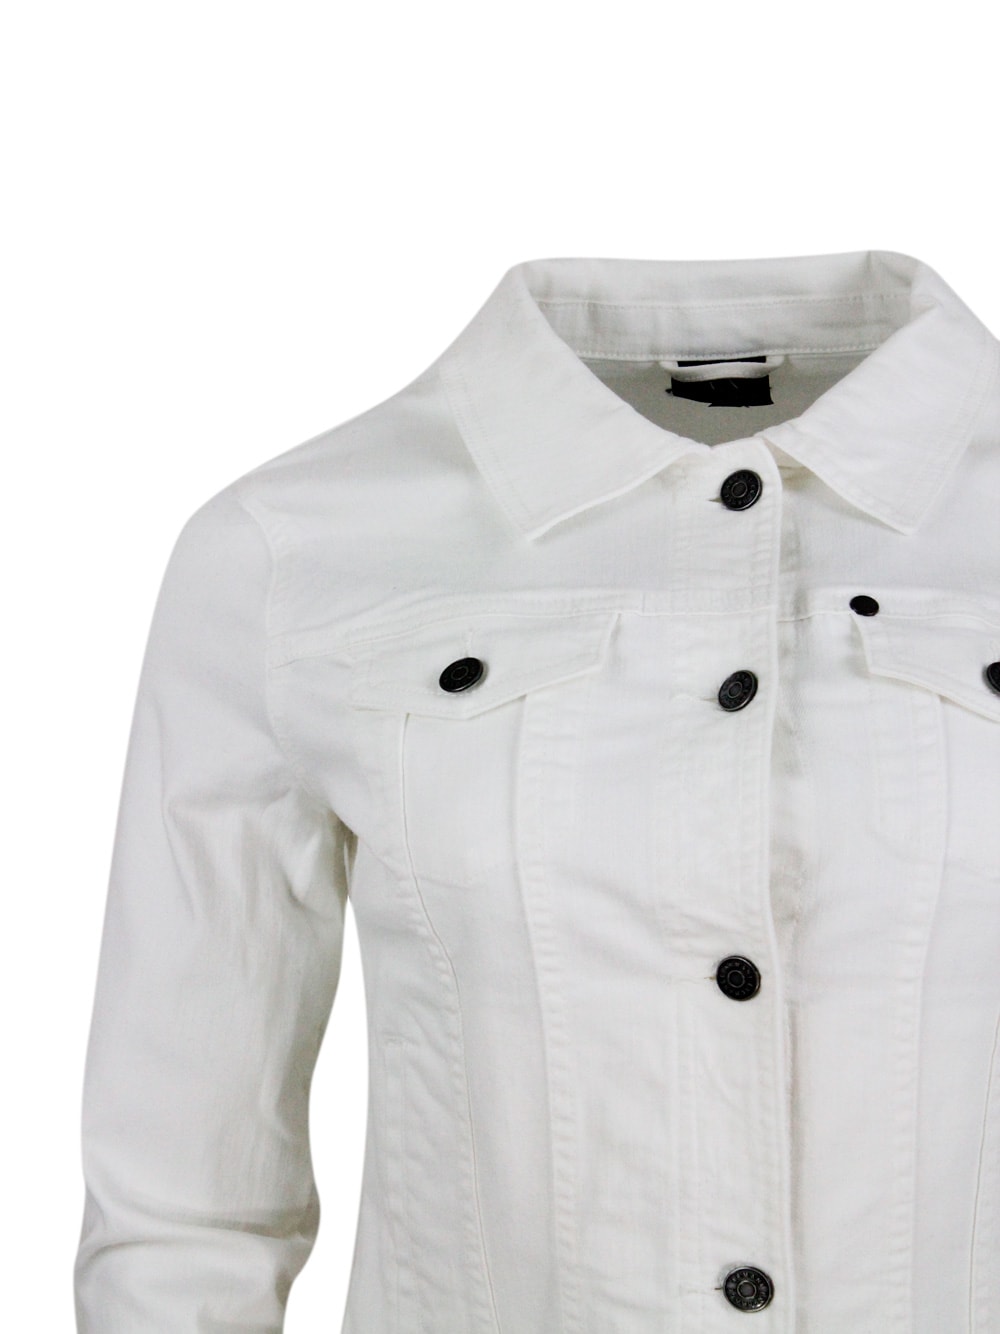 Shop Armani Collezioni Denim Jacket With Patch Pockets On The Chest, Side Welt Pockets And Button Closure In White